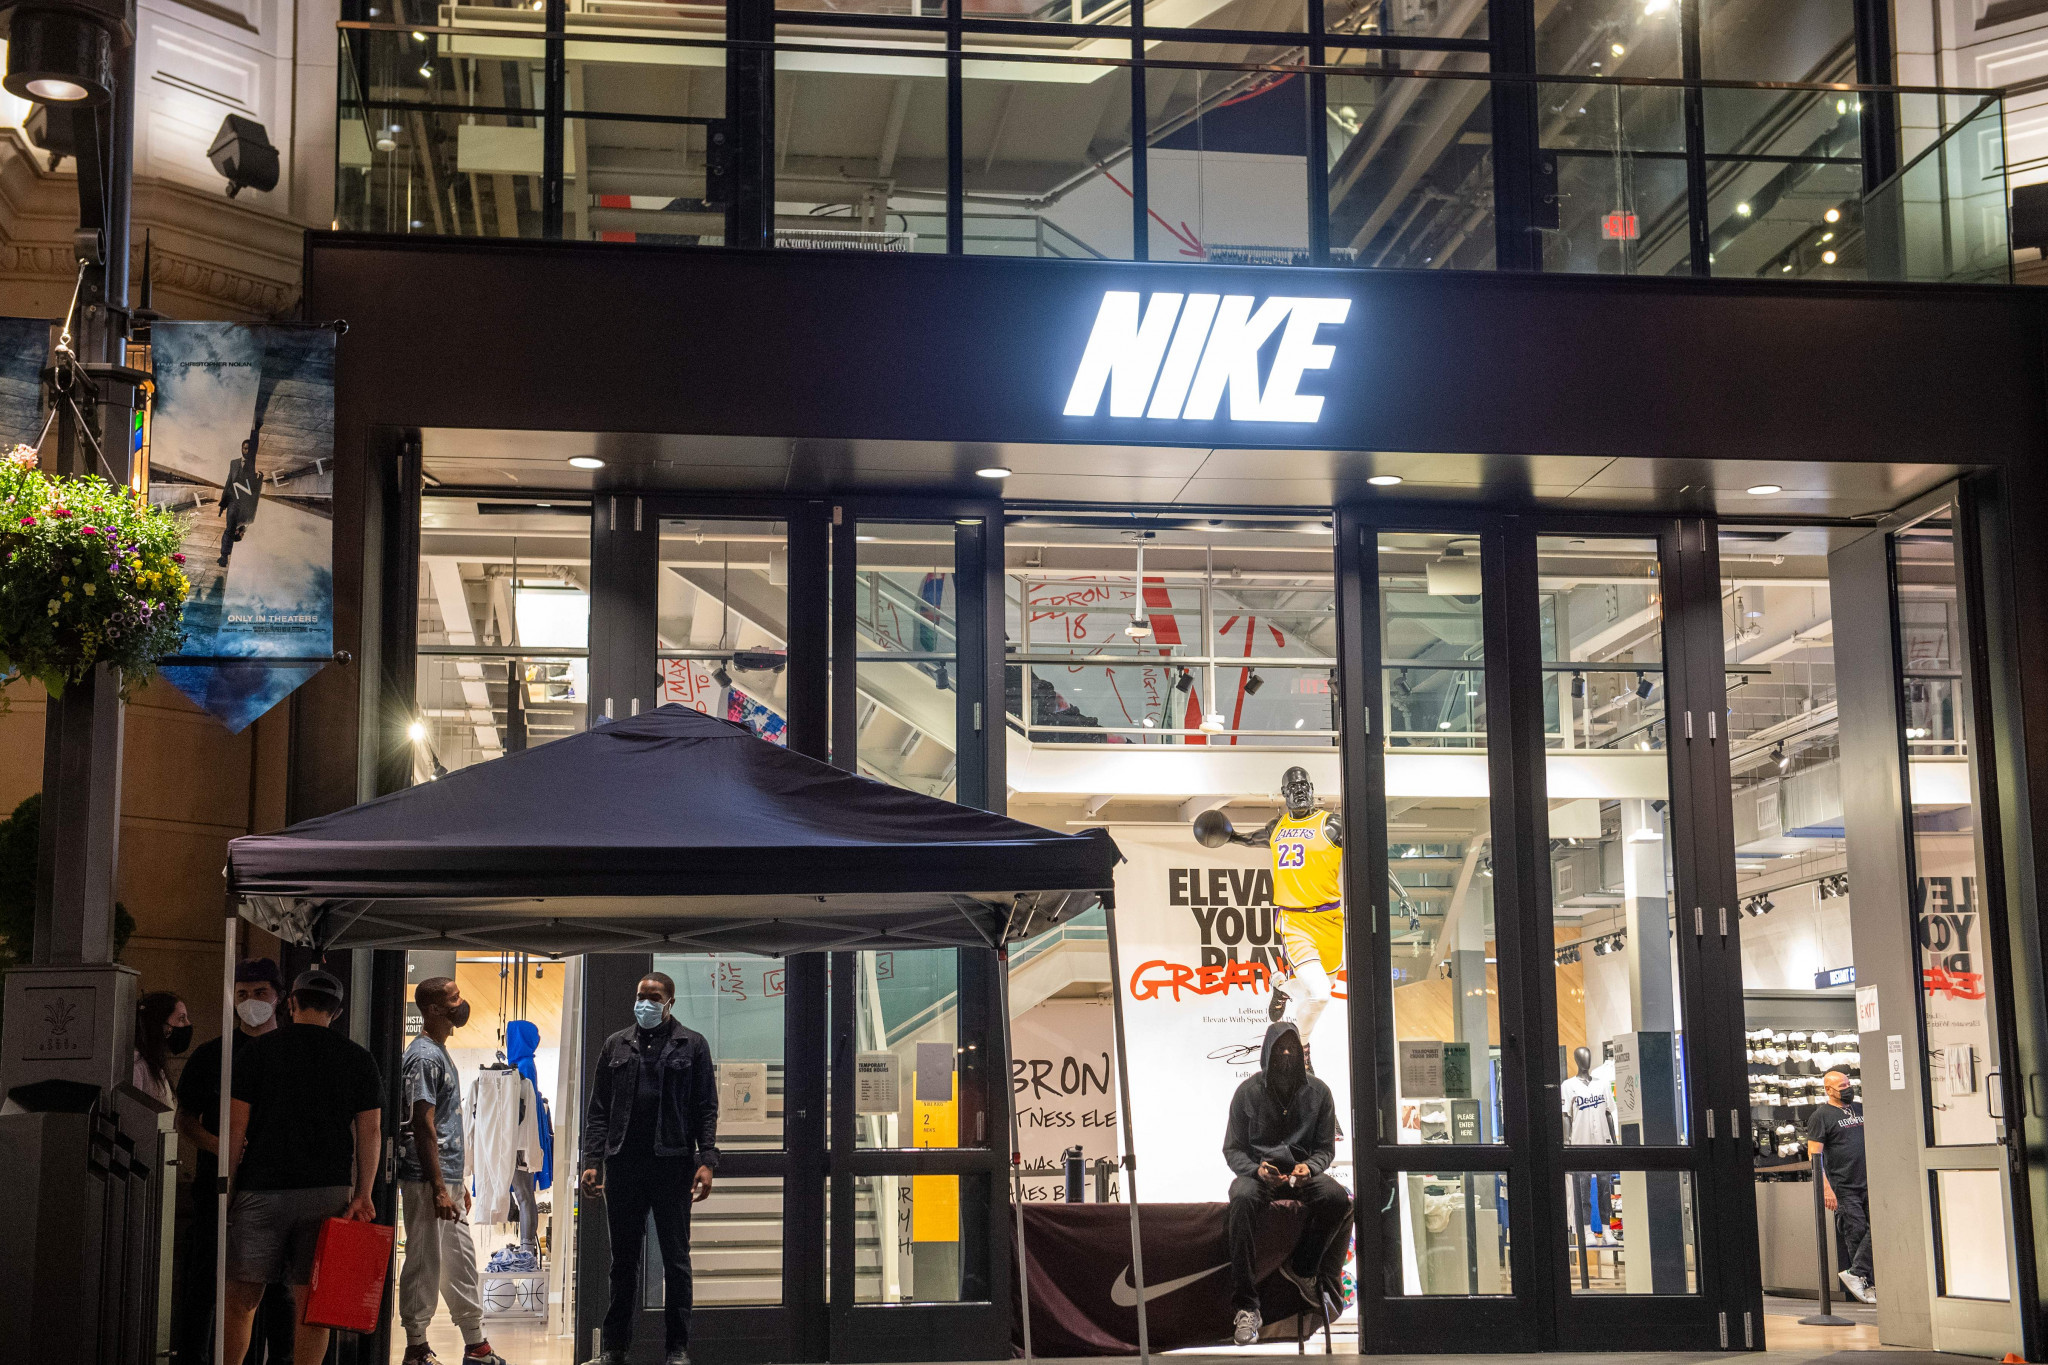 Nike's Olympics pop-up in heart of Rio - Inside Retail Asia